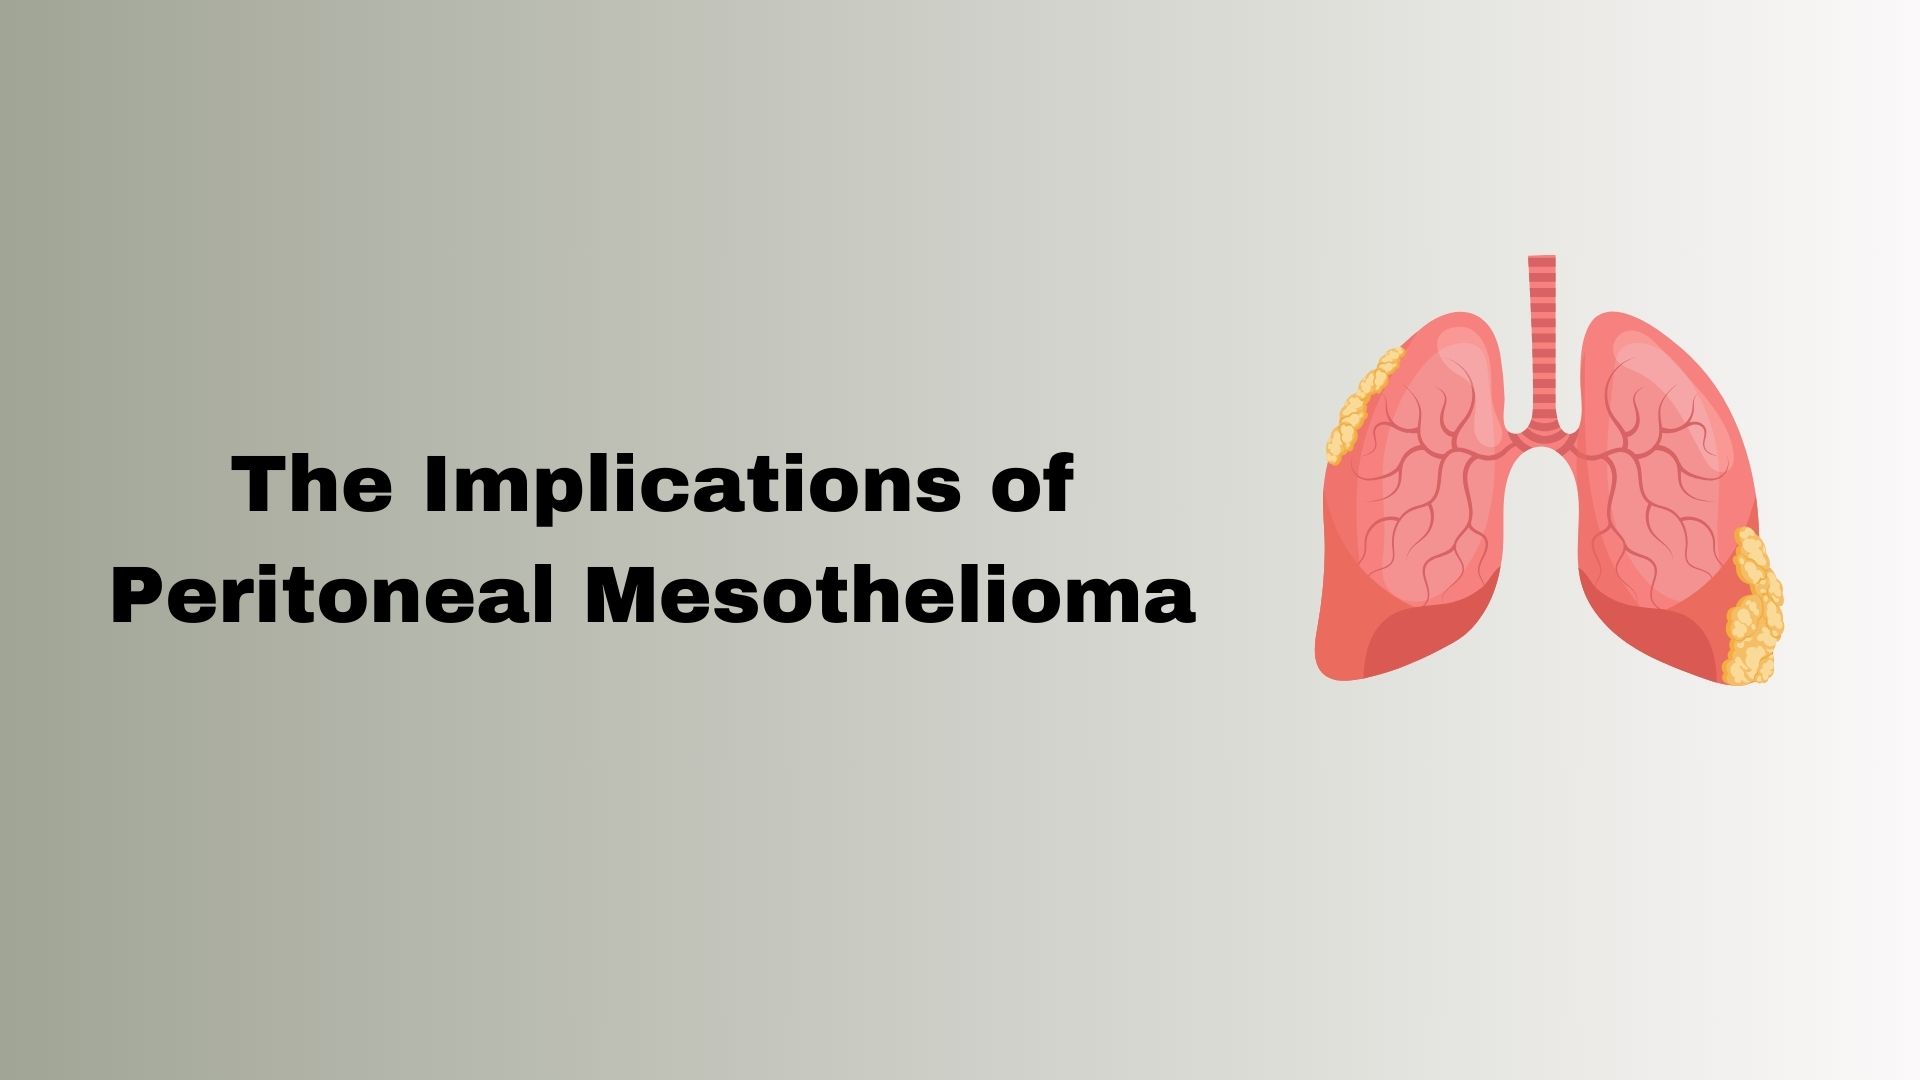 The Implications of Peritoneal Mesothelioma